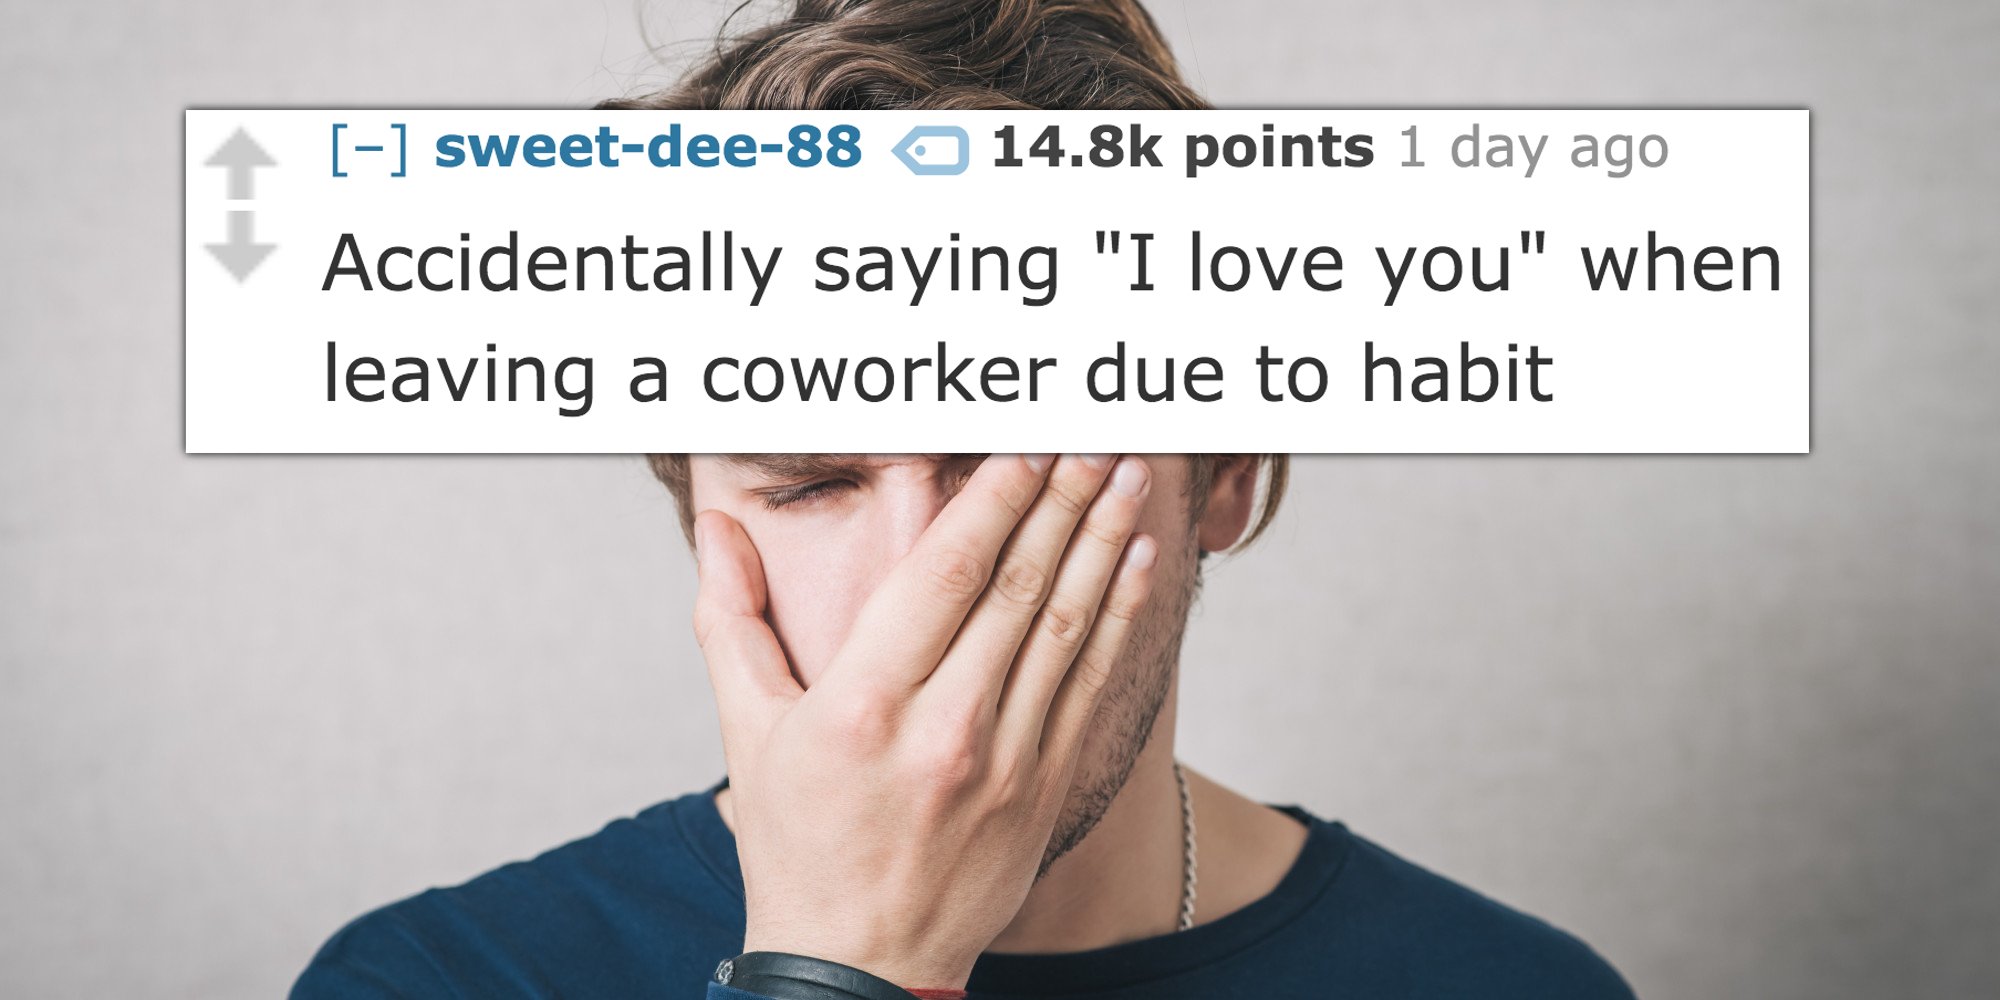 15 Embarrassing Things That Are Hilarious When Not Happening to You